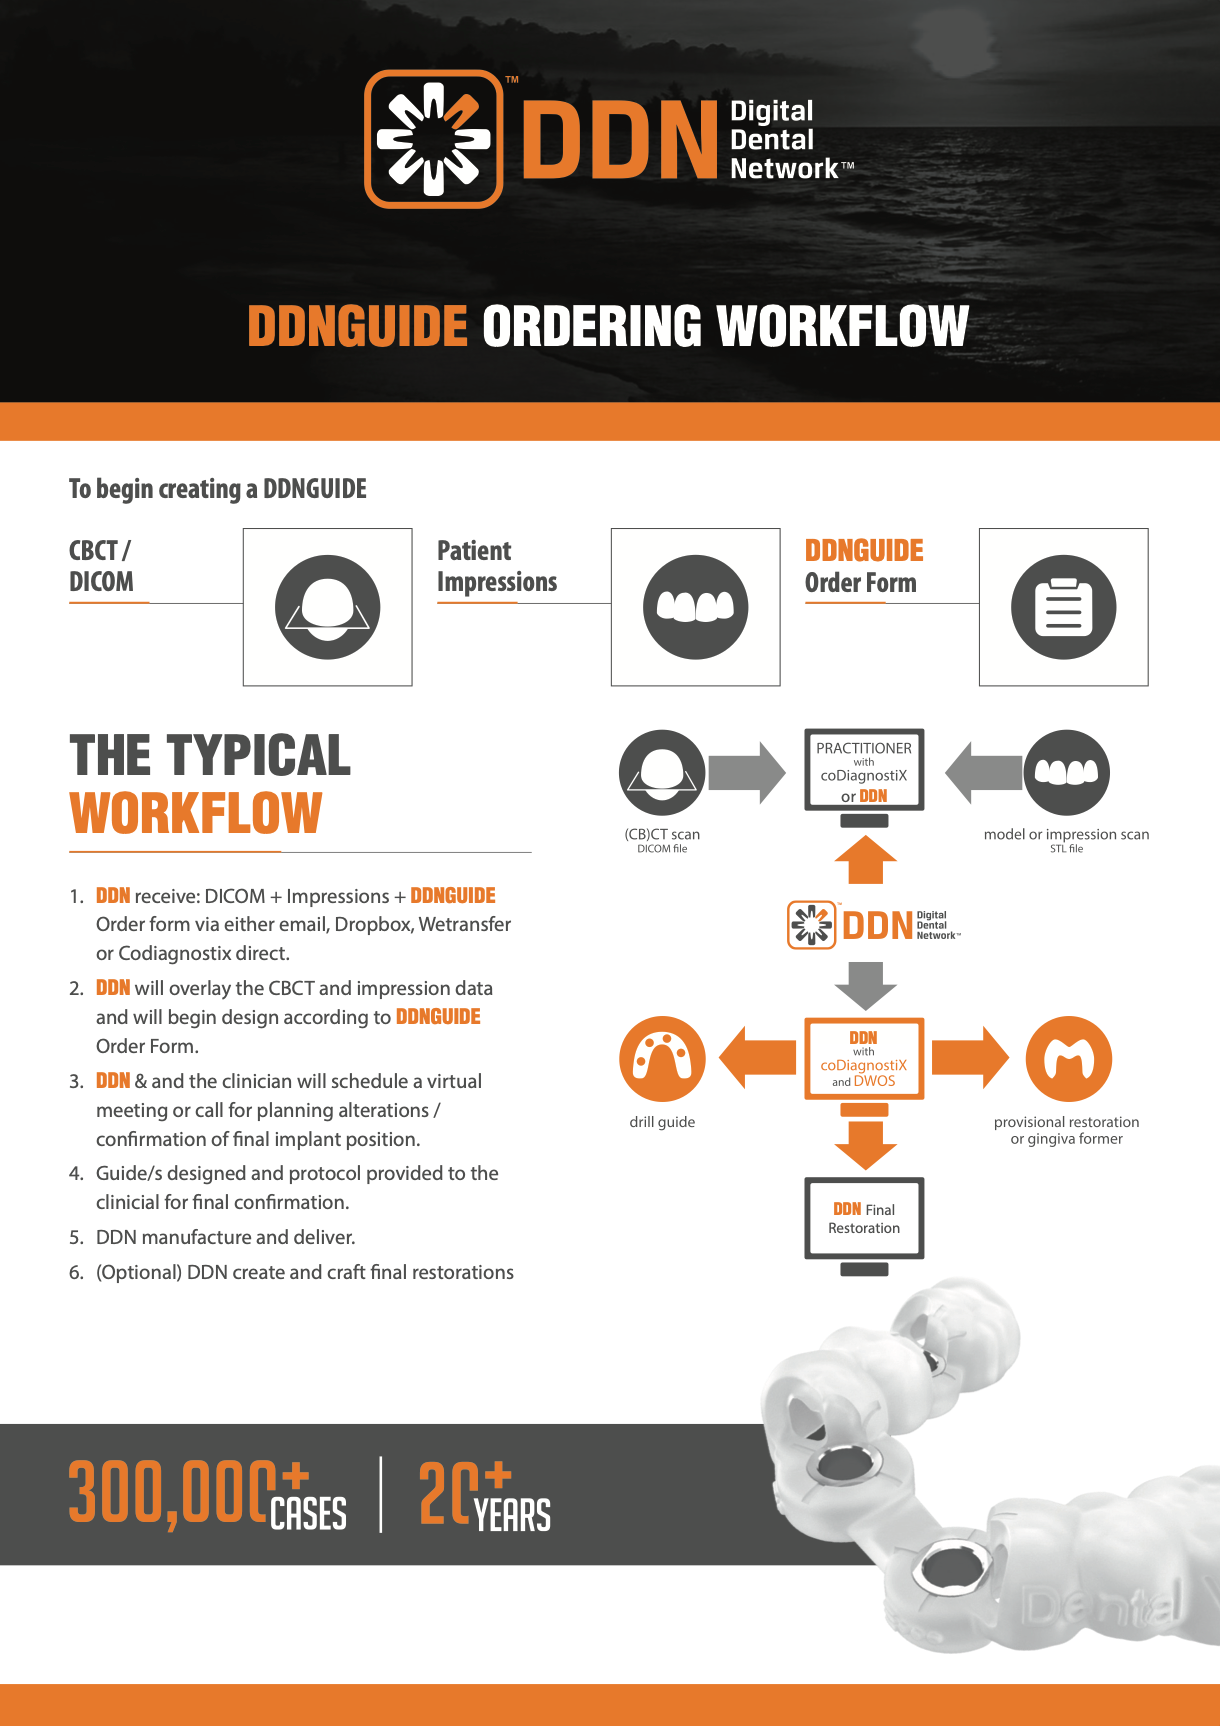 DDNGUIDE: Workflow and CBCT Protocol